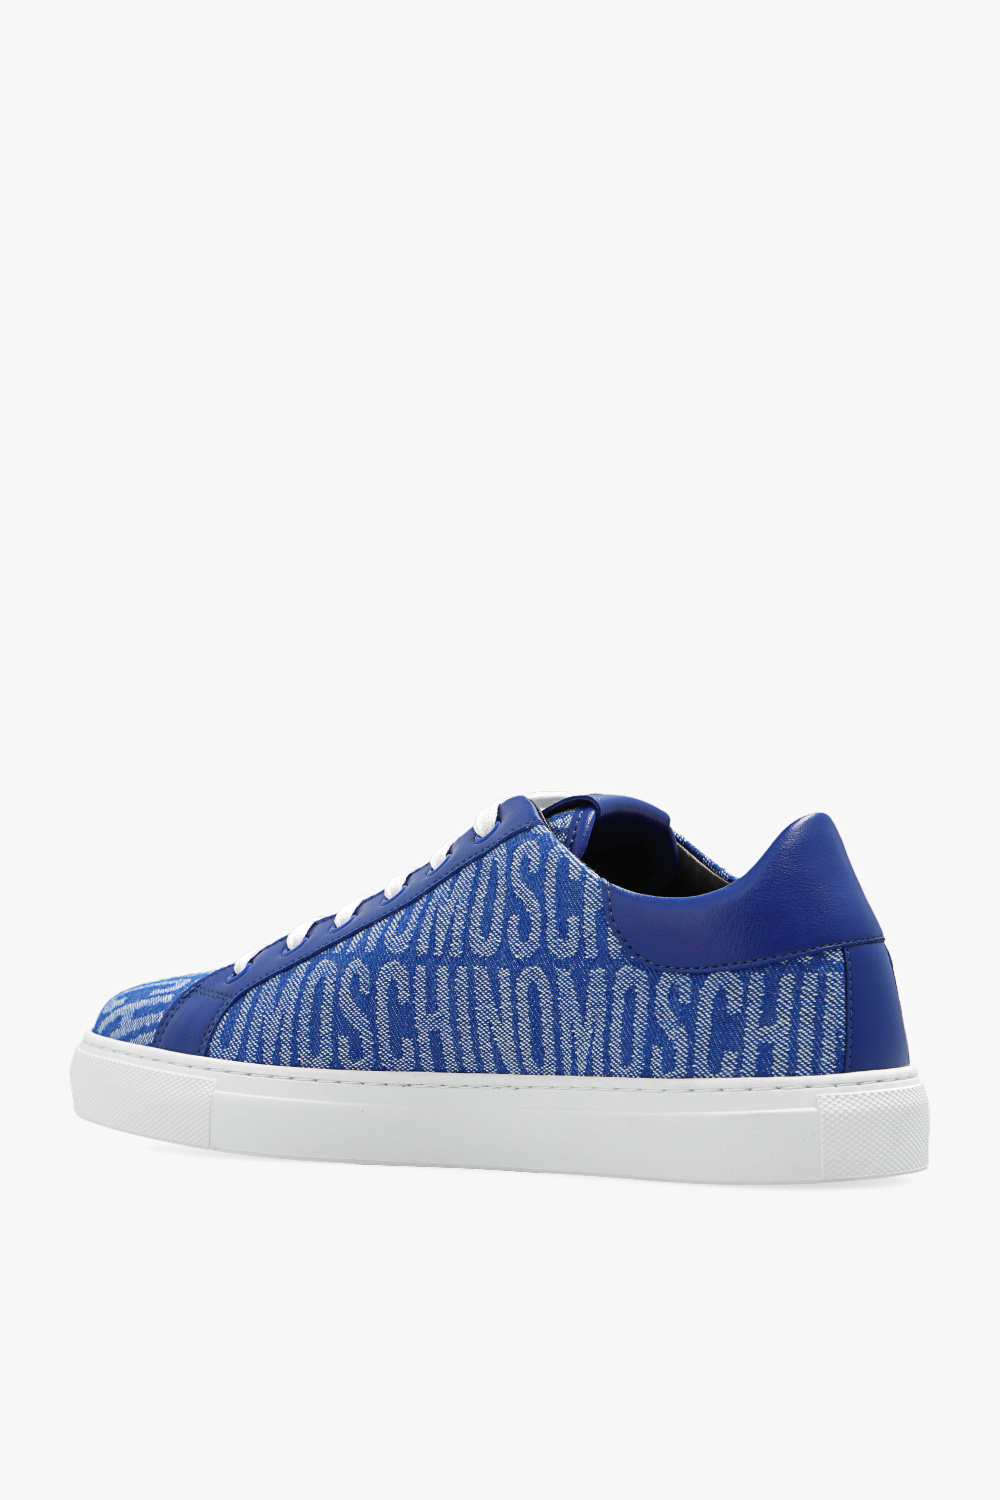 Moschino logo-print touch strap sneakers